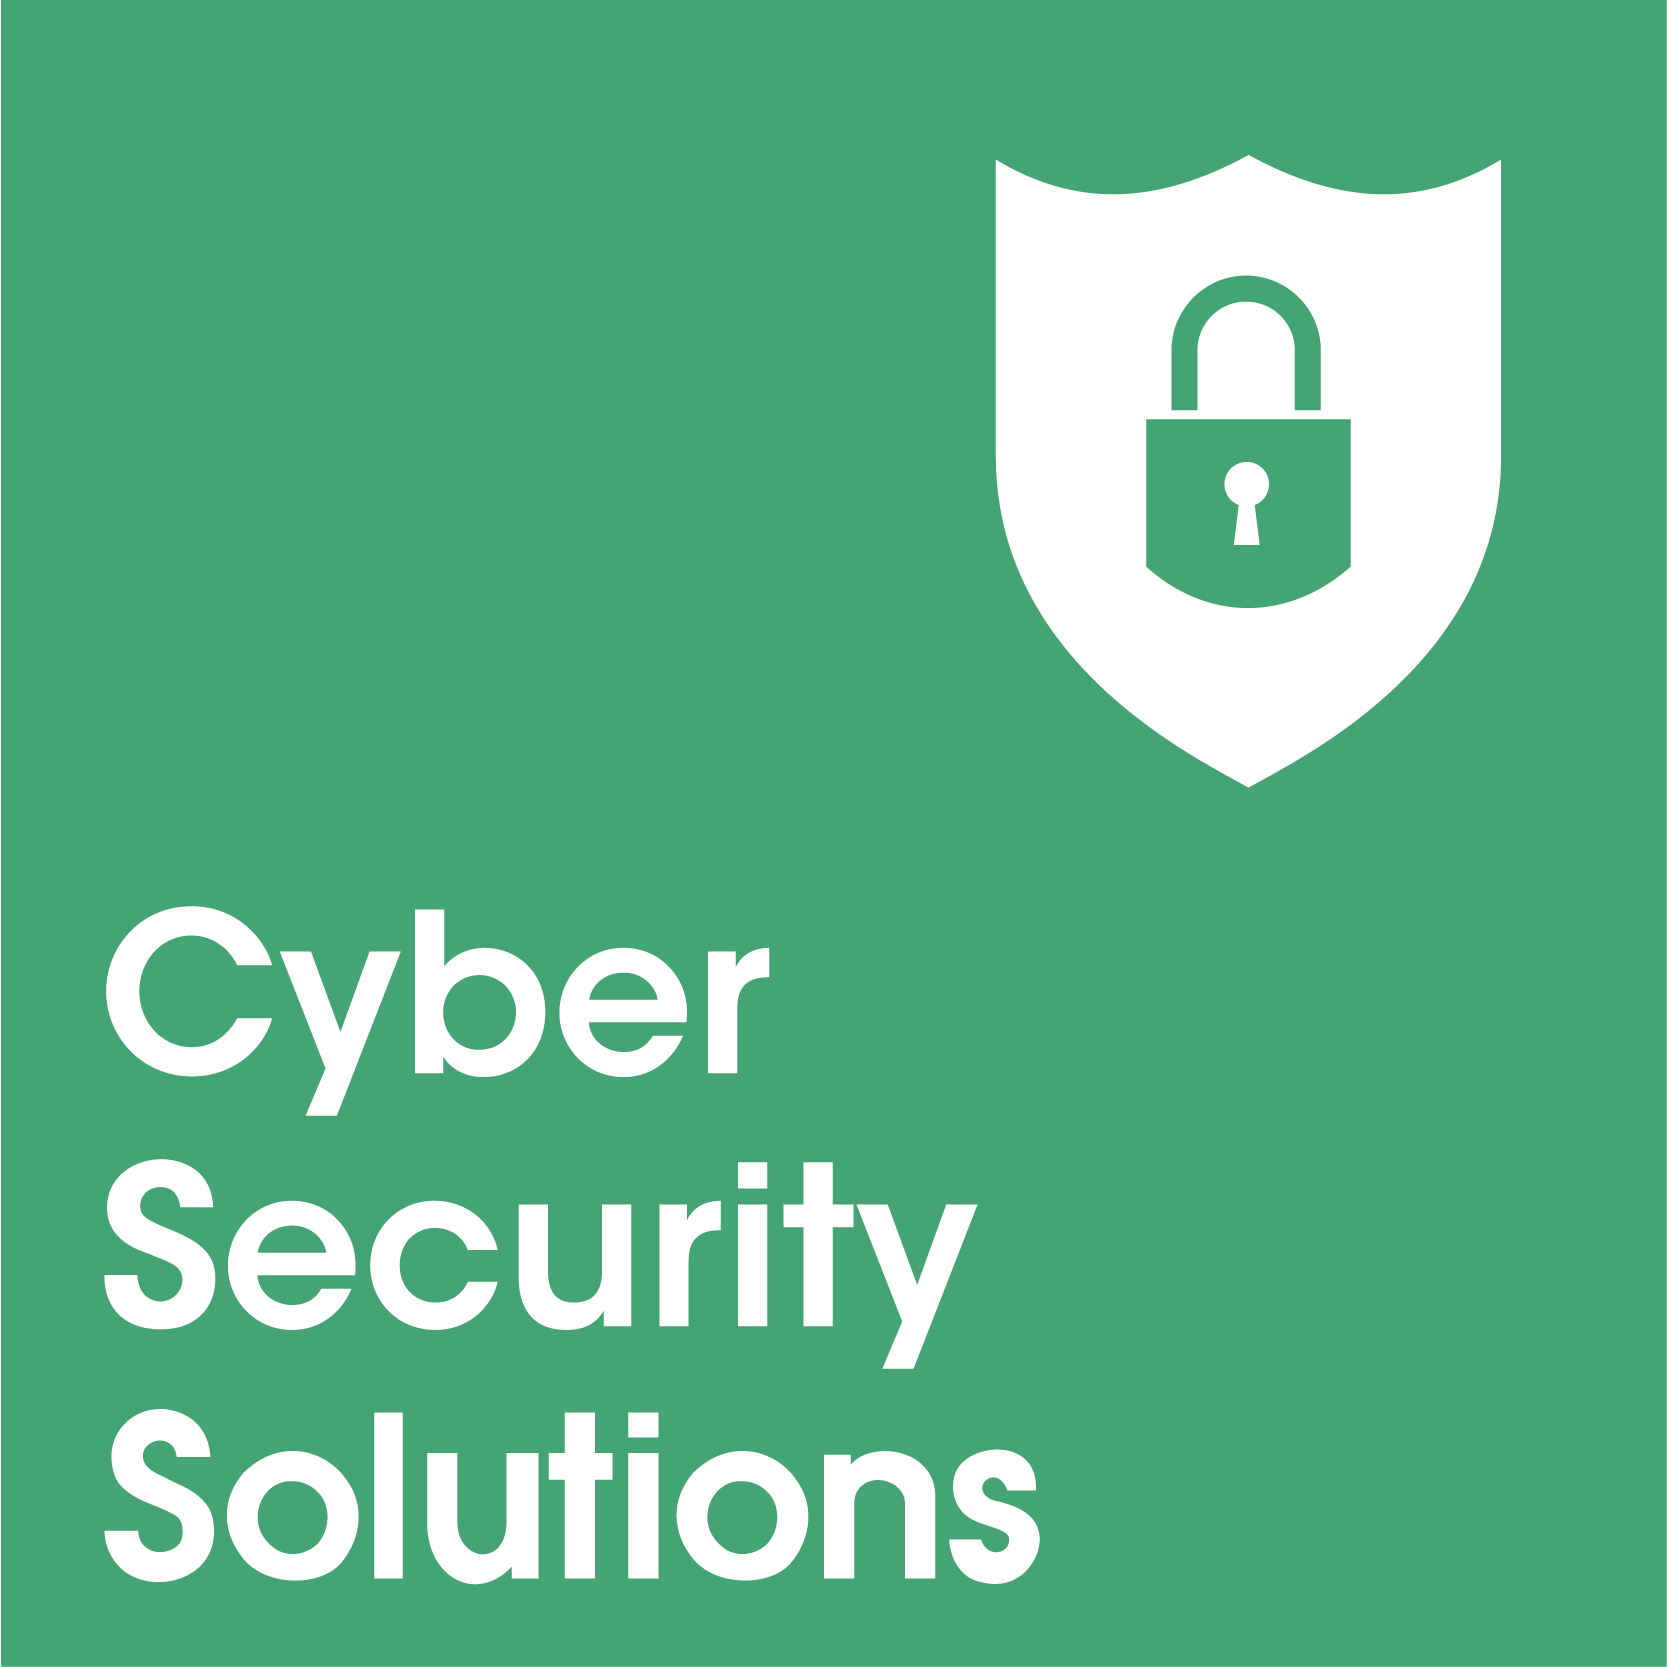 Cyber Security Solutions block